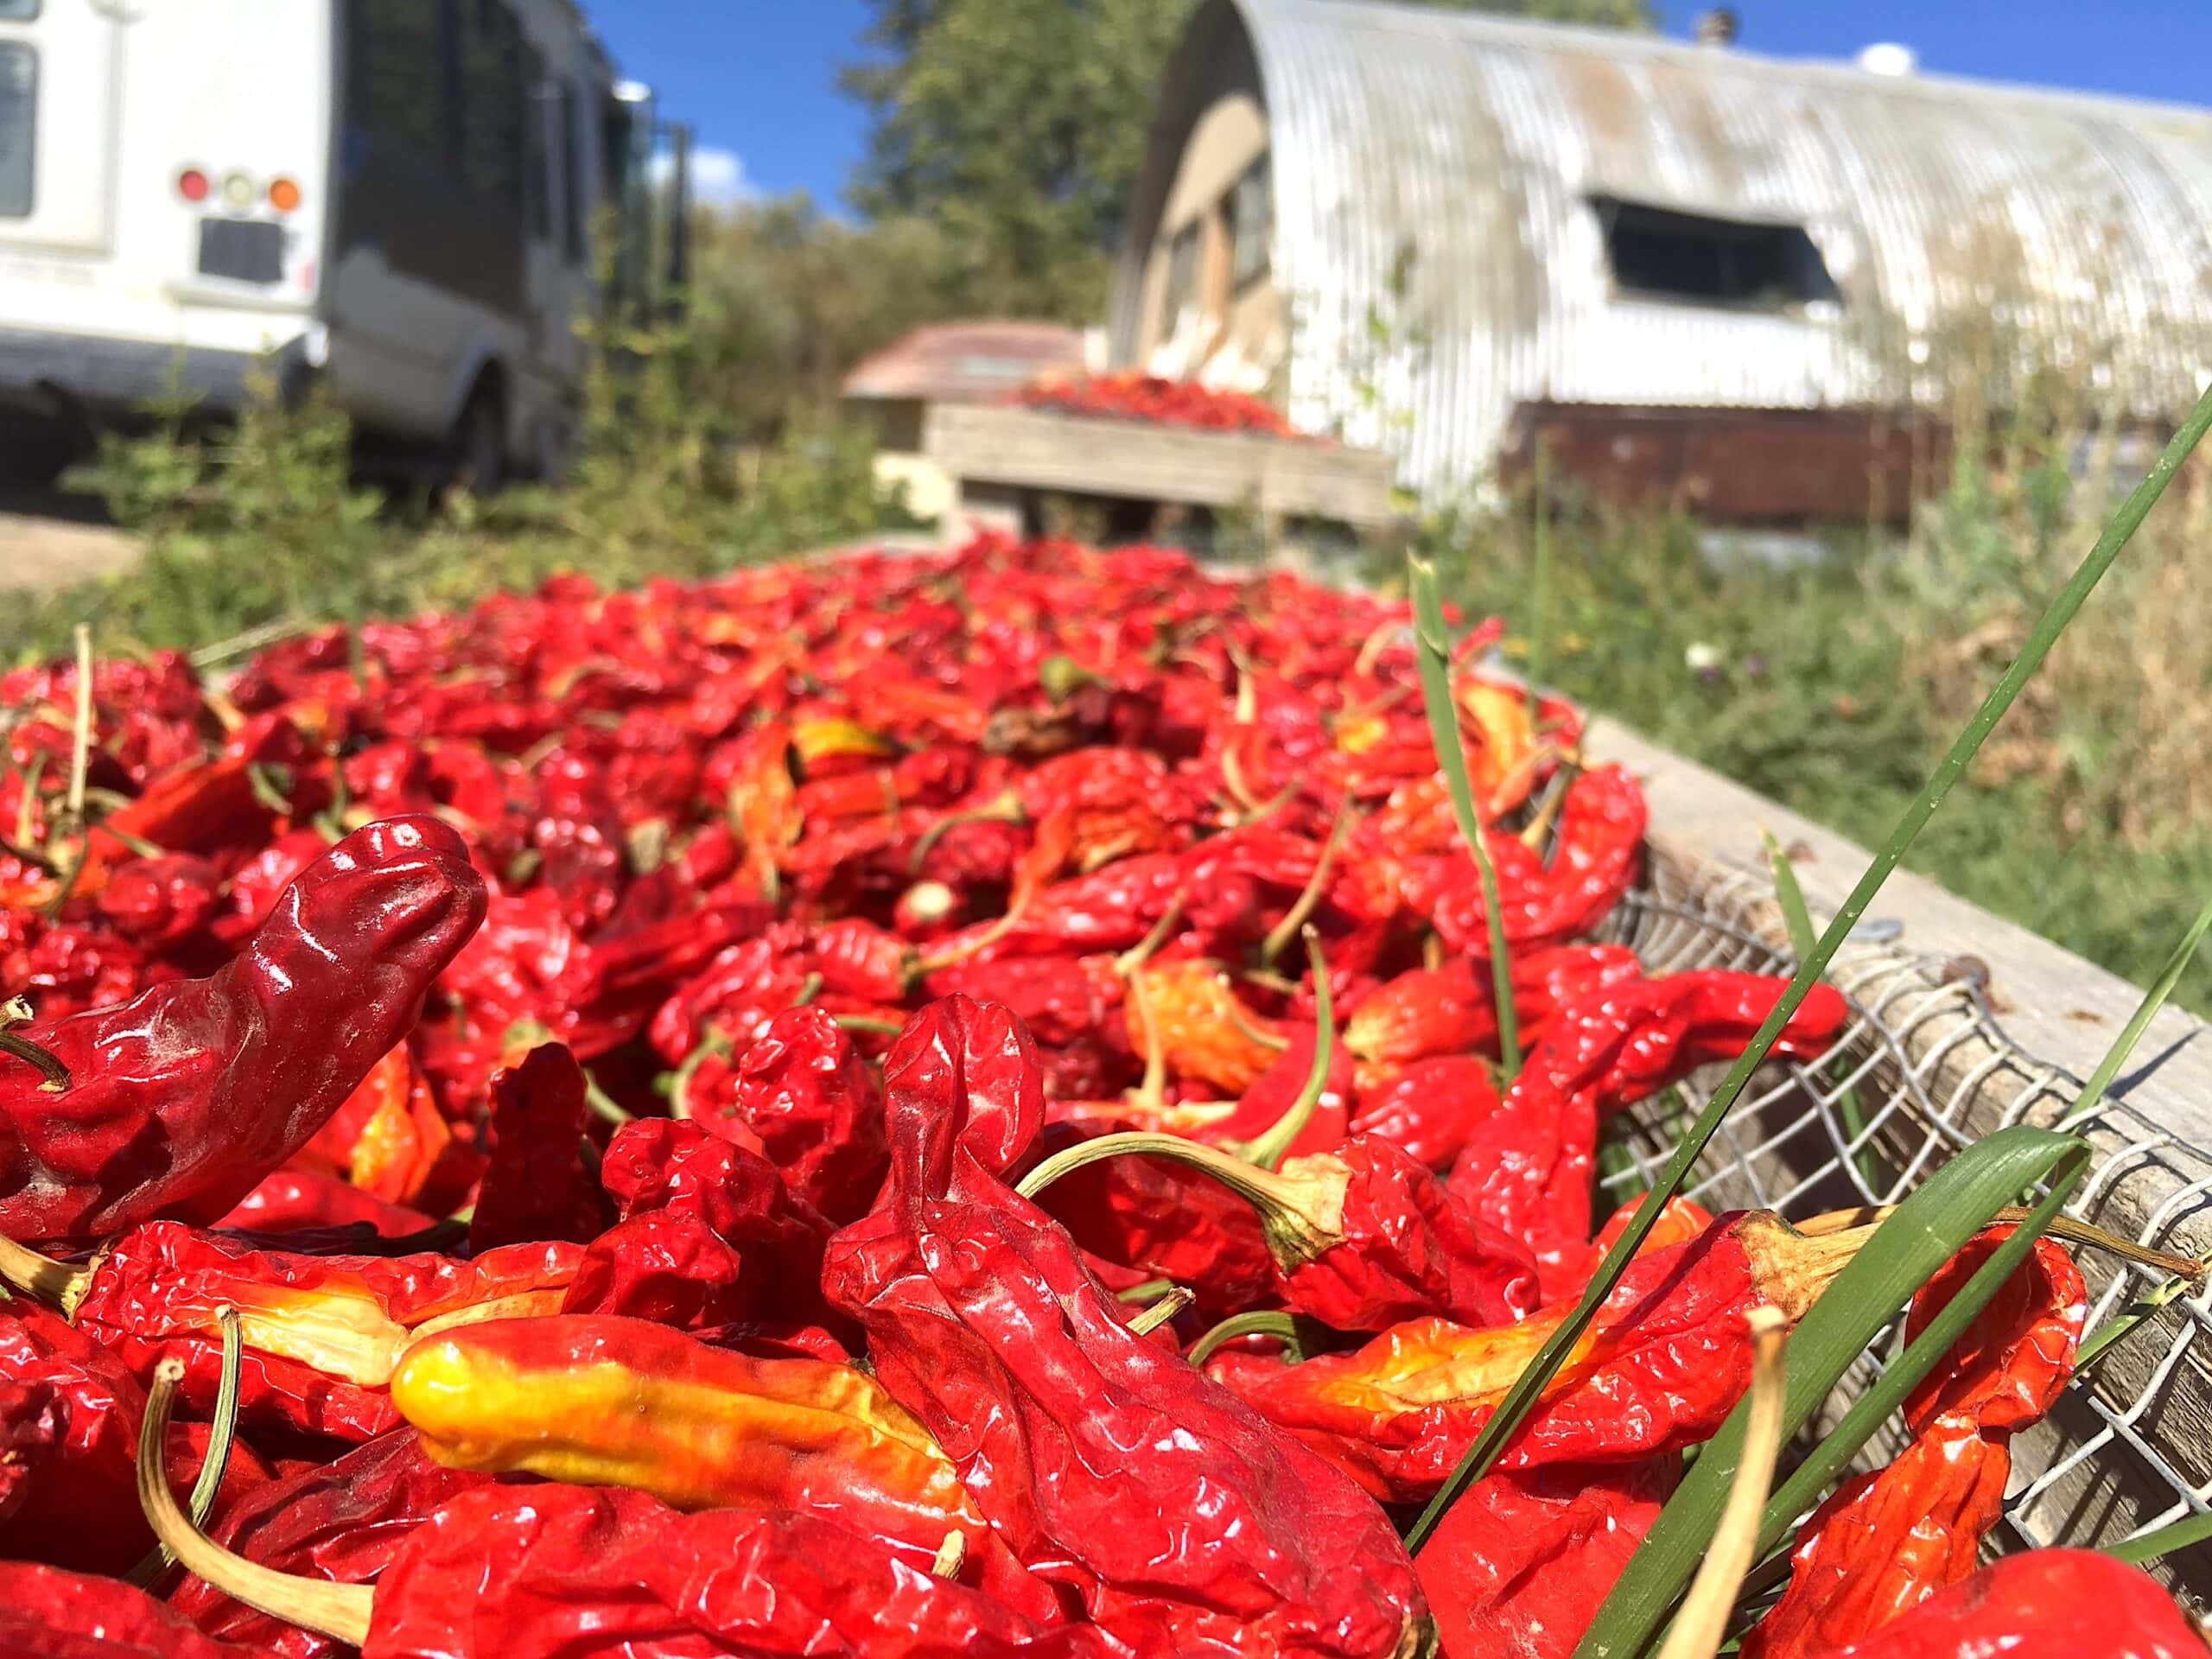 Shishito chile powder? Worth a shot! We have been drying peppers, and once they are ready, we get ready grinding. 